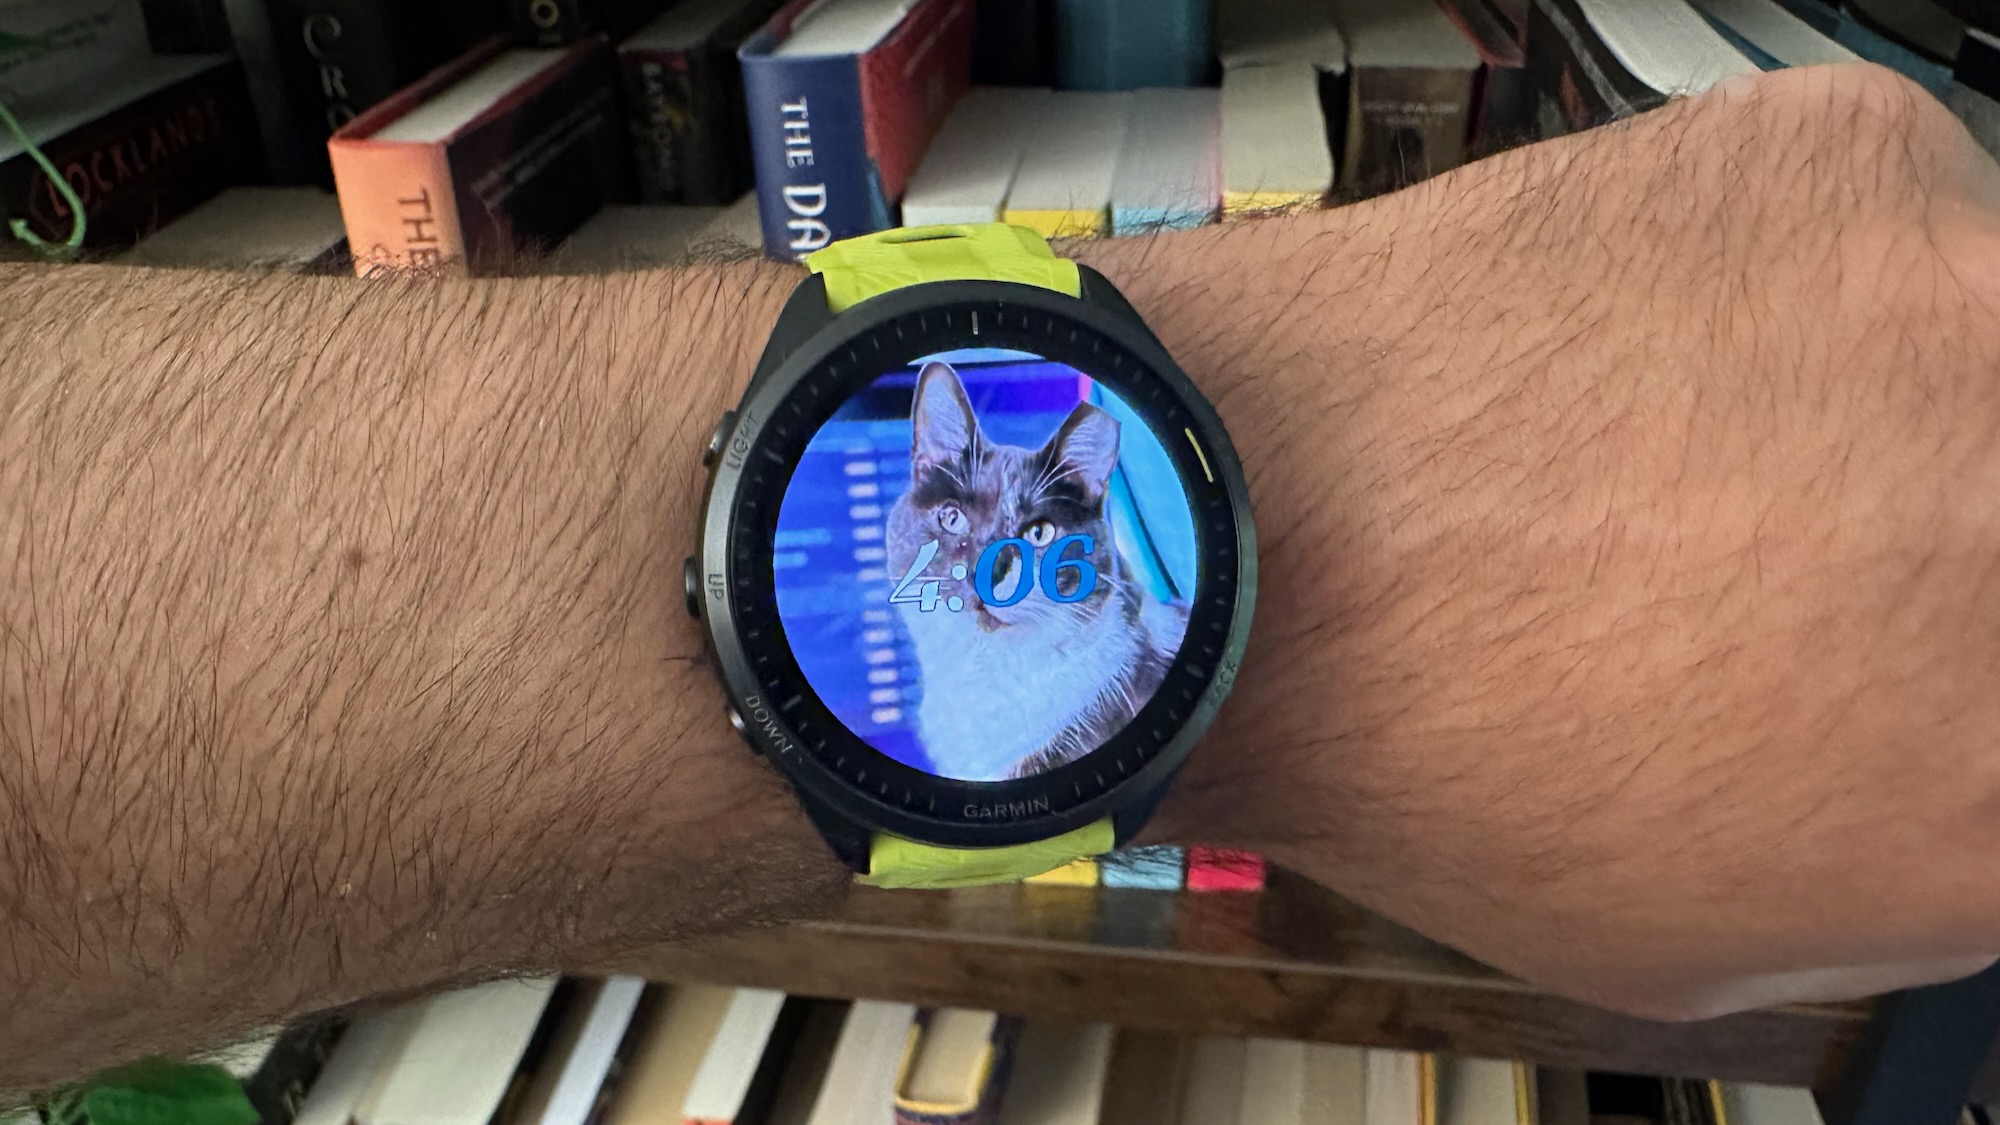 A custom watch face showing a photo of a cat on the Garmin Forerunner 965